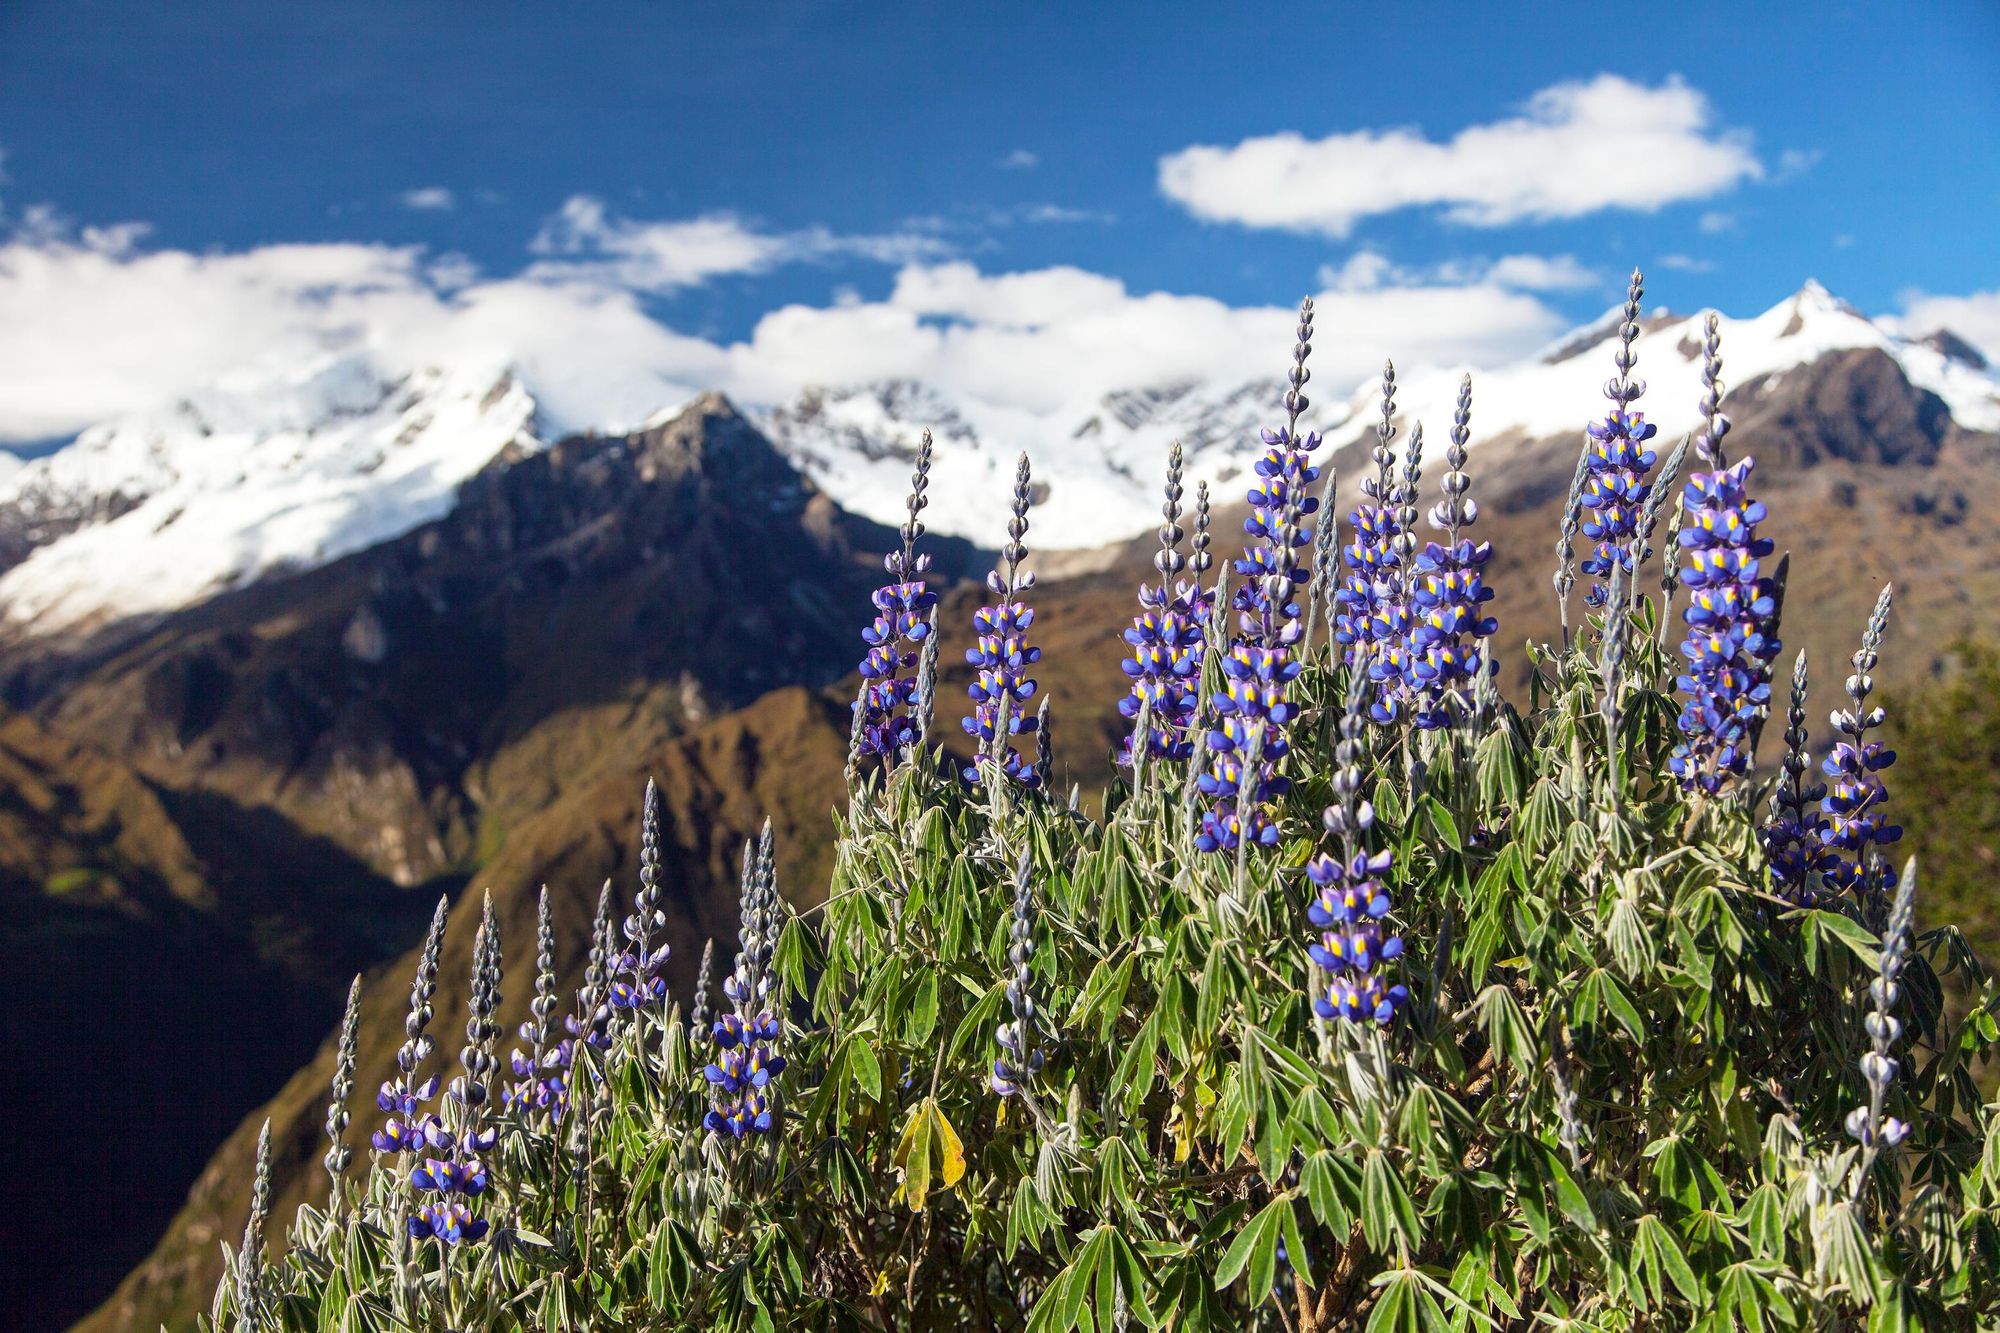 Lupinus flowers, with the backdrop of Mount Saksarayuq and the Andes mountains. Photo: Getty